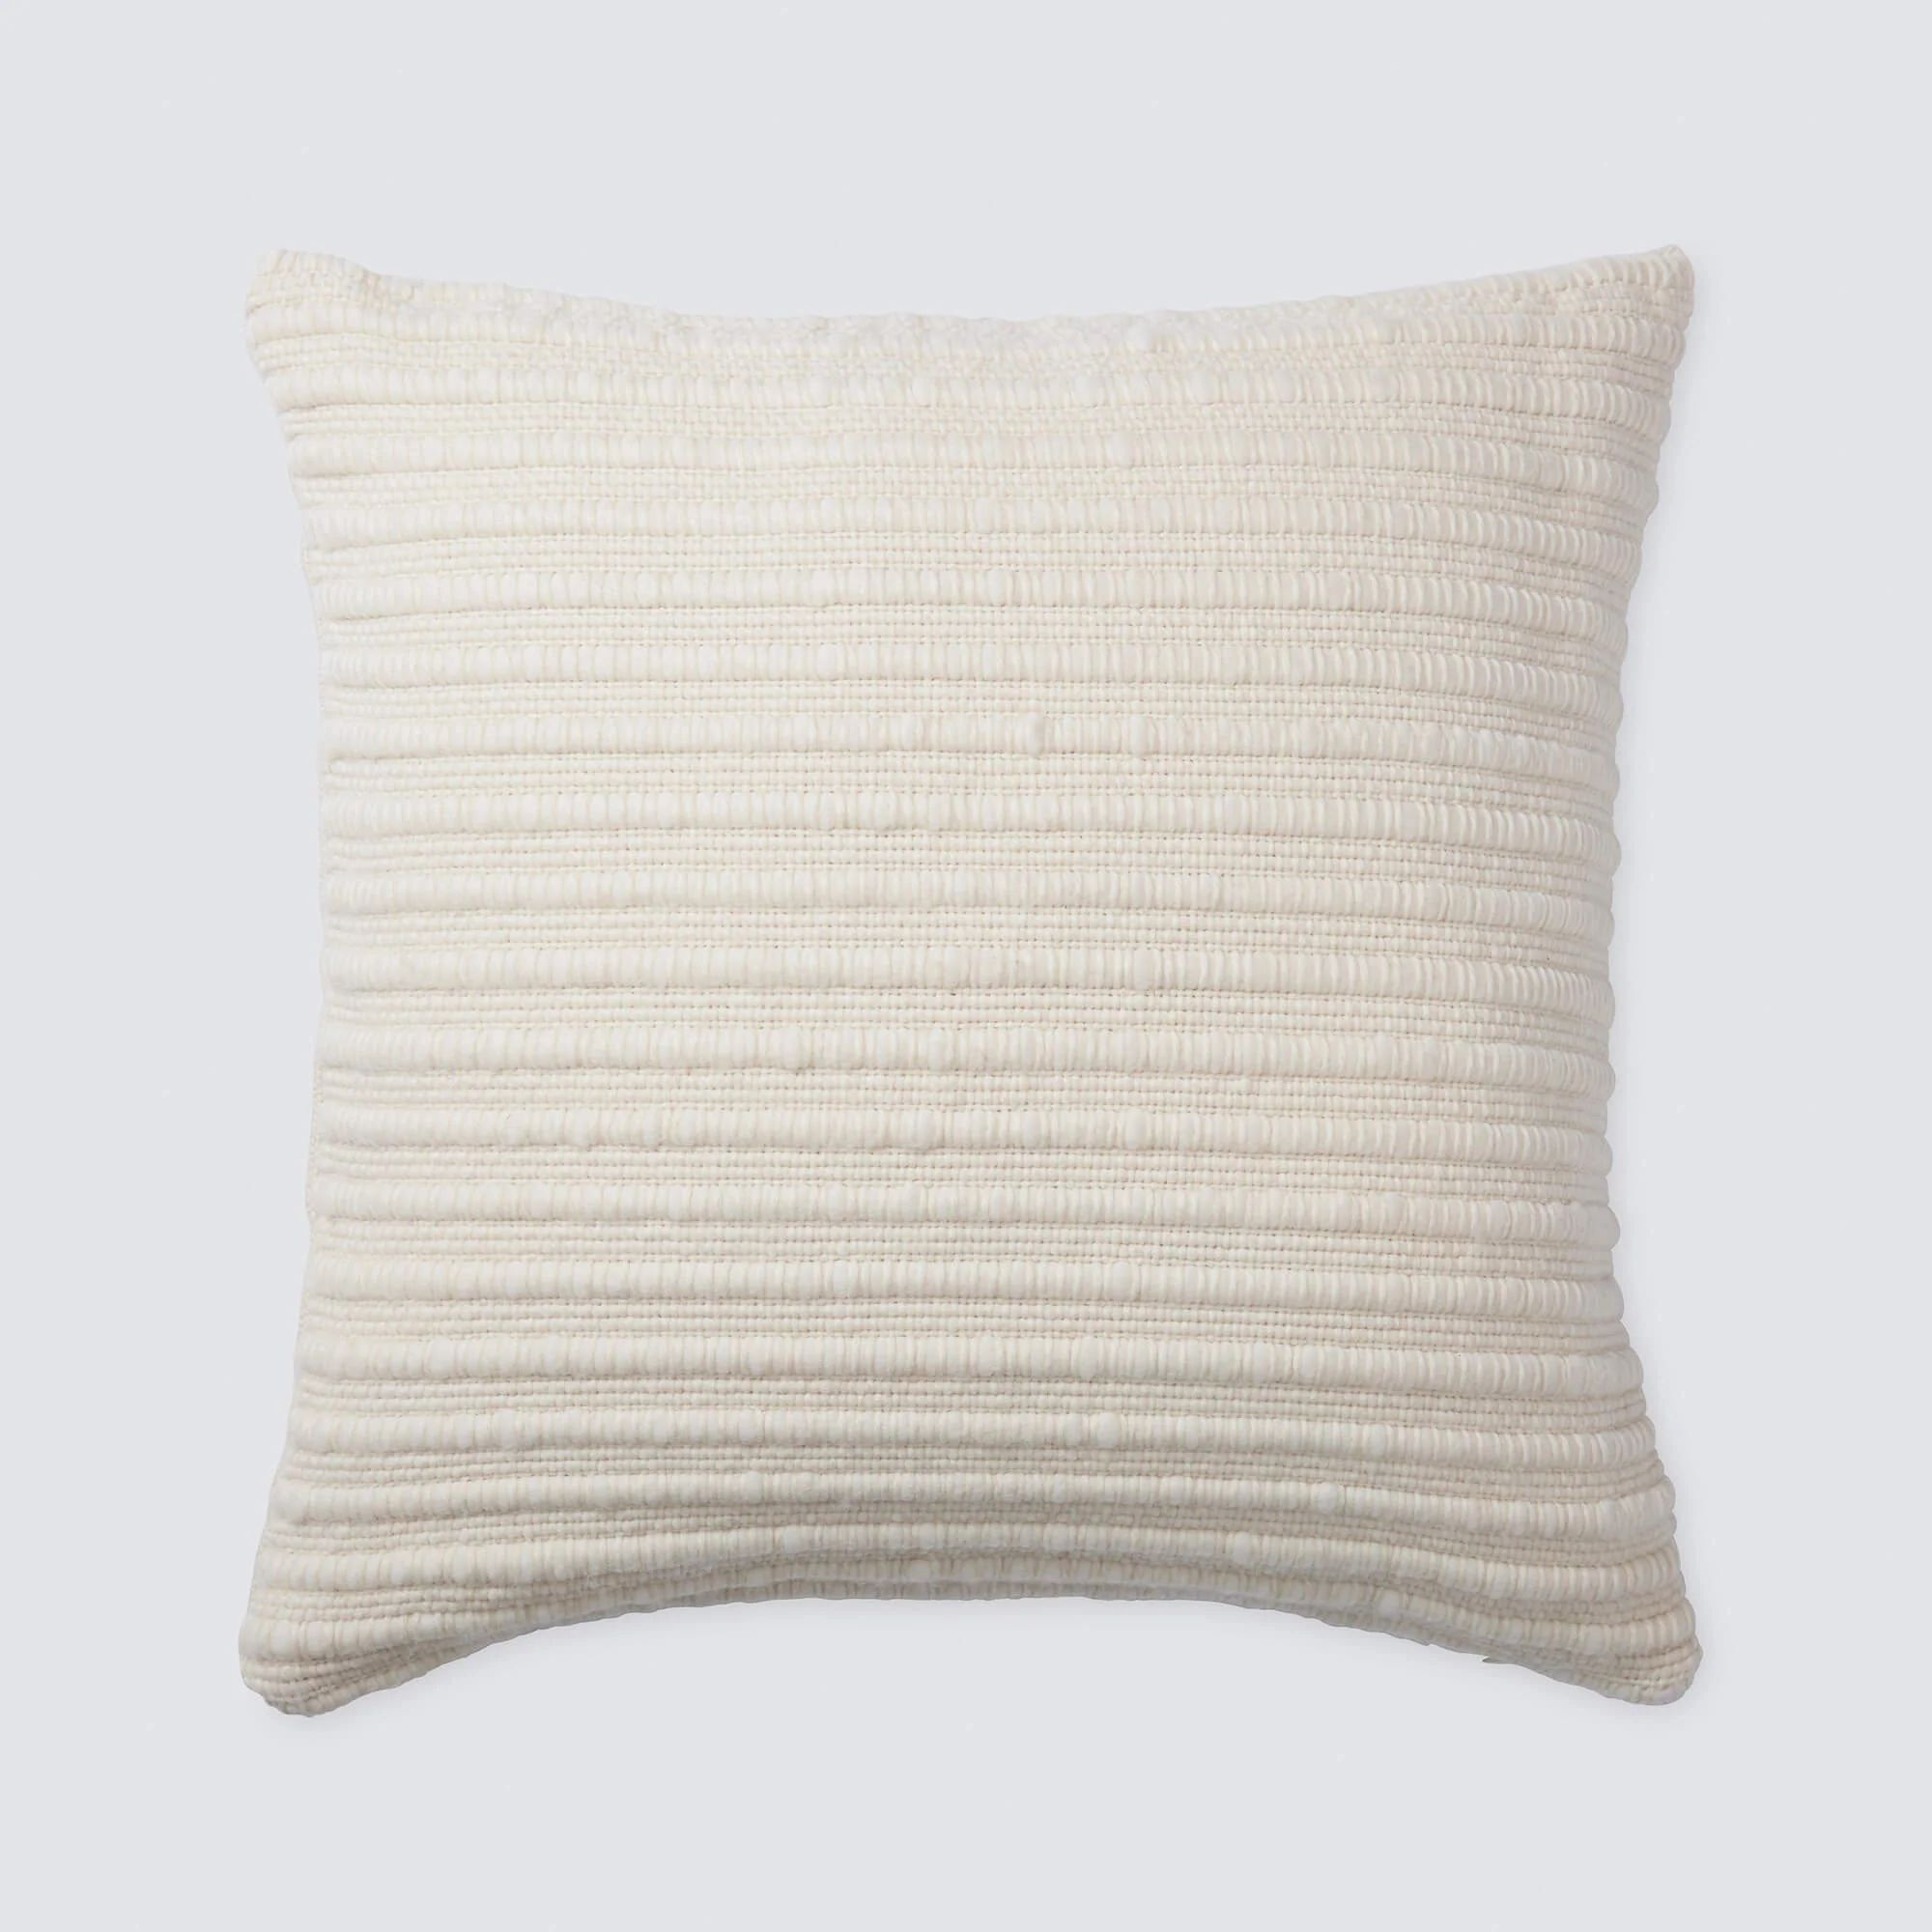 La Duna Textured Pillow | Neutral Accent Pillow   – The Citizenry | The Citizenry